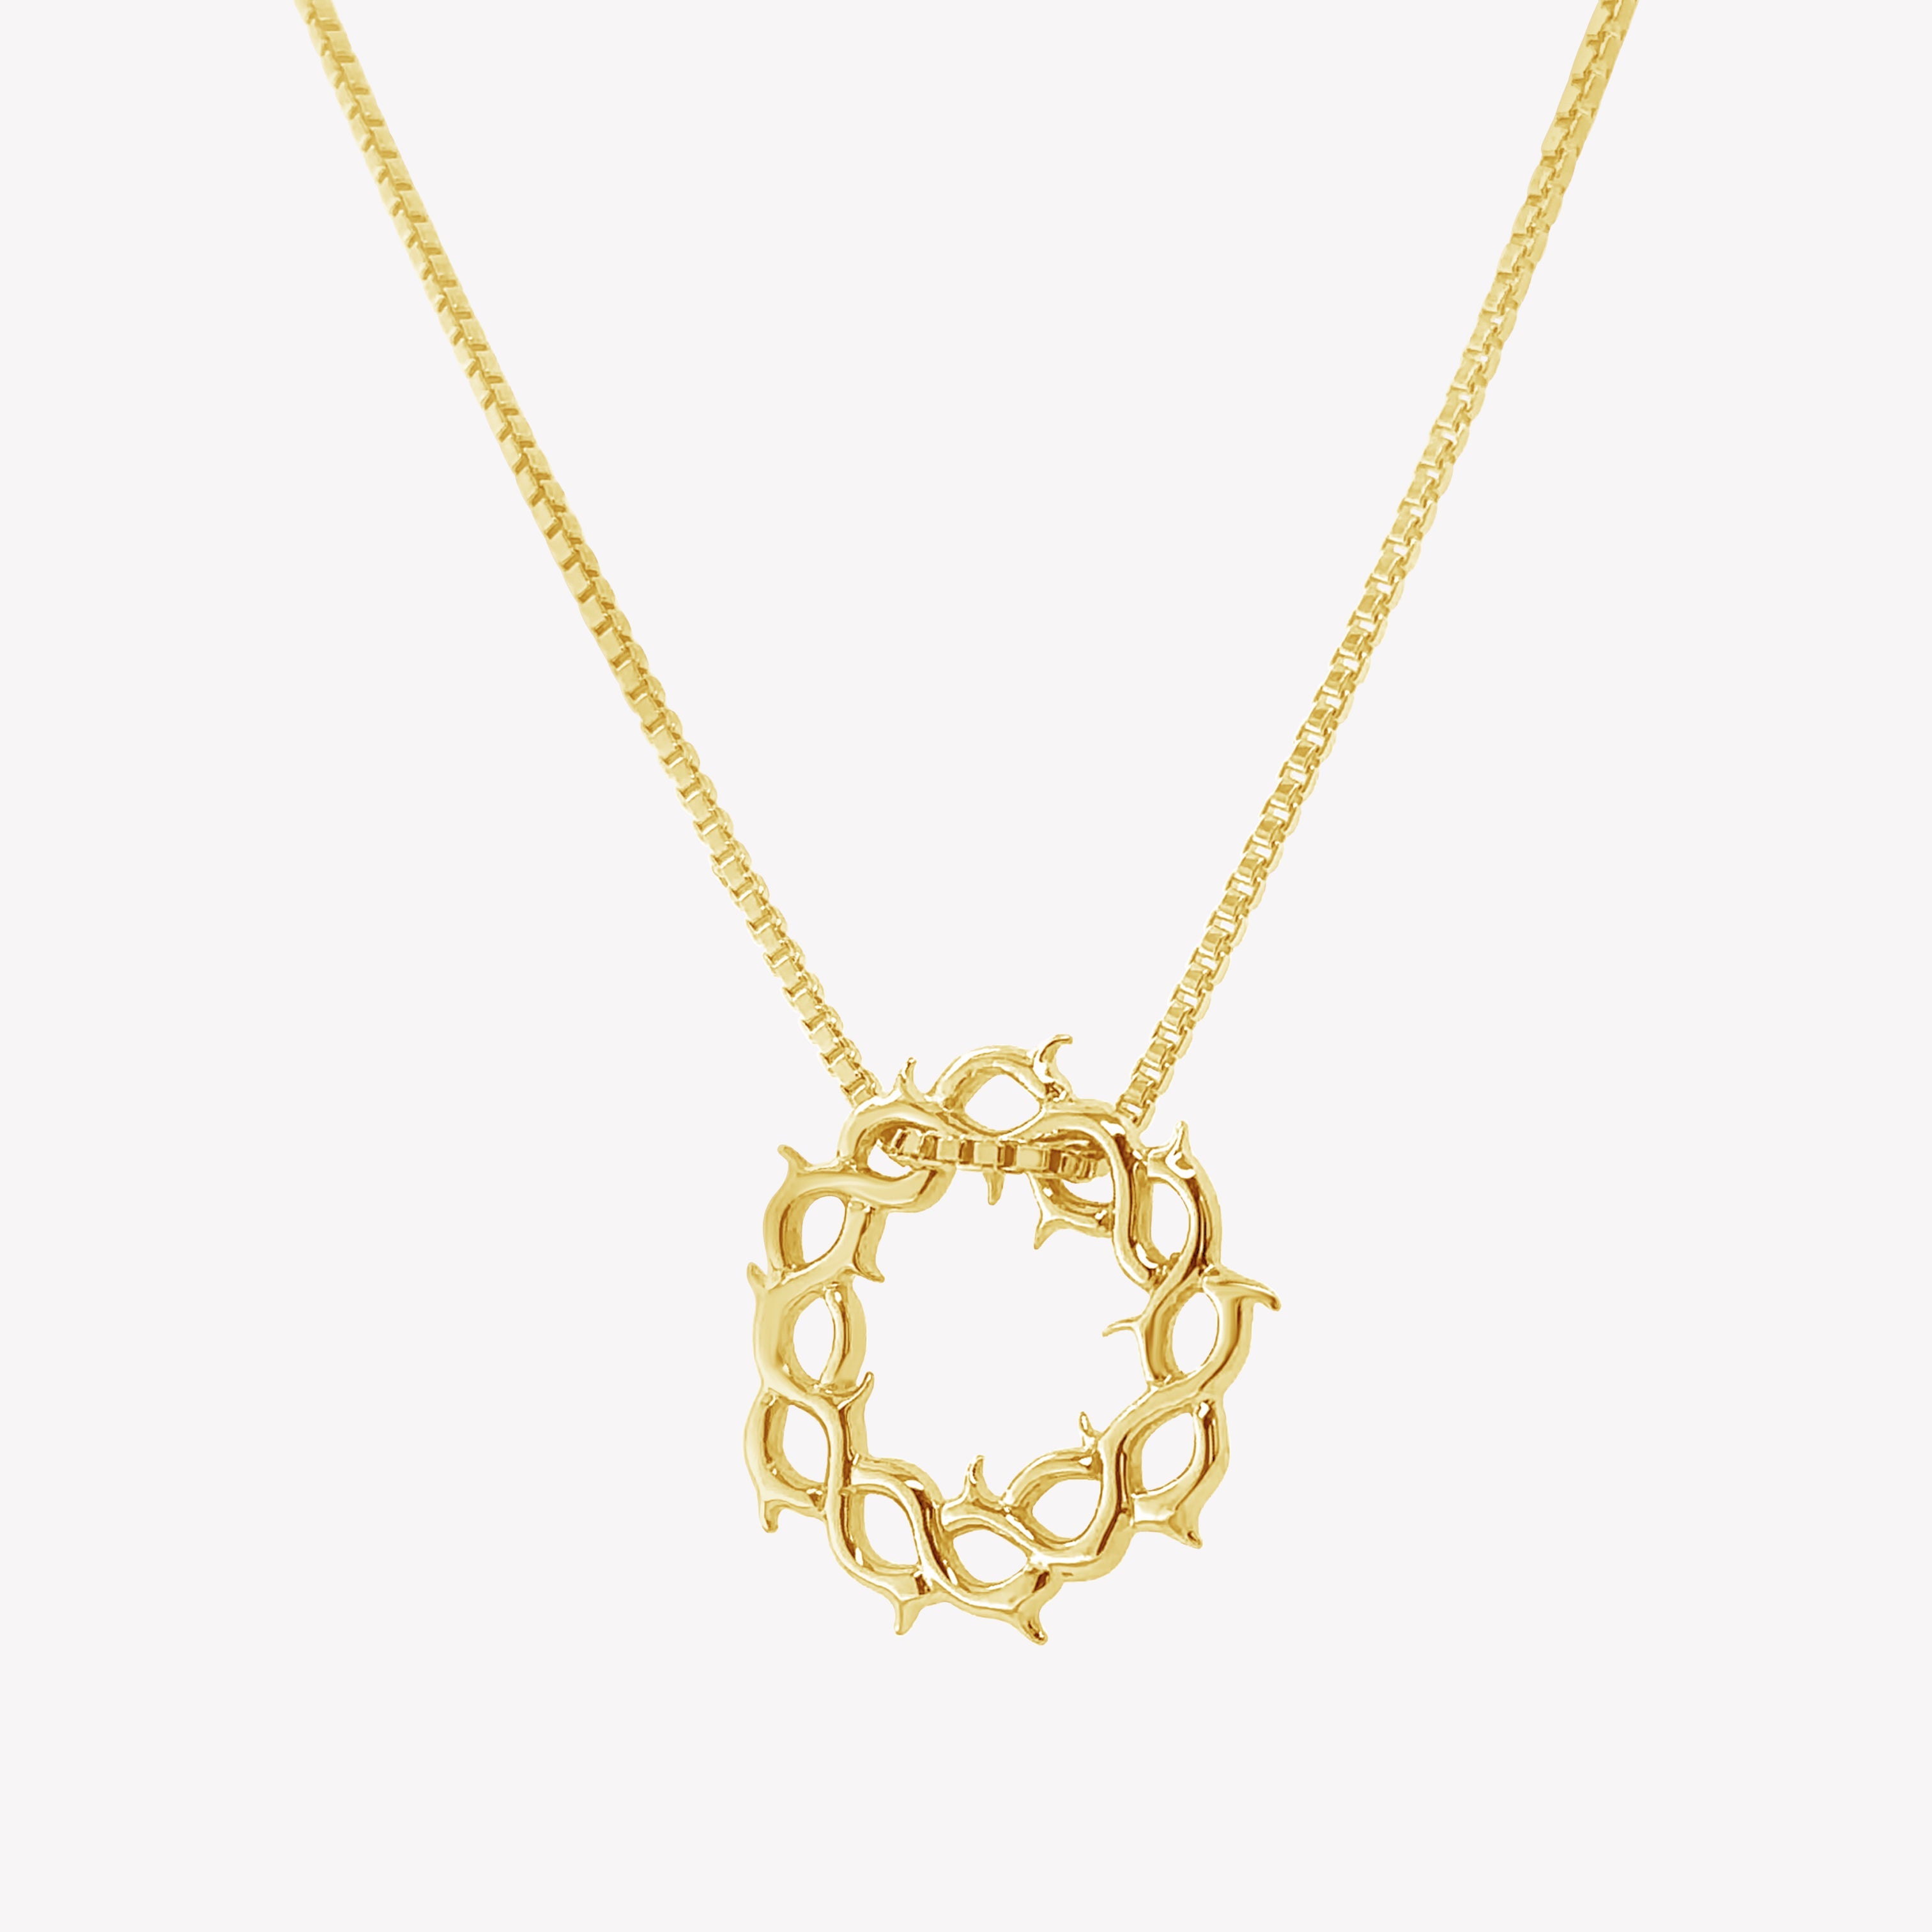 Crown of thorns necklace in gold vermeil by Rizen Jewelry.  Box chain is threaded through faith inspired crown of thorns pendant. 